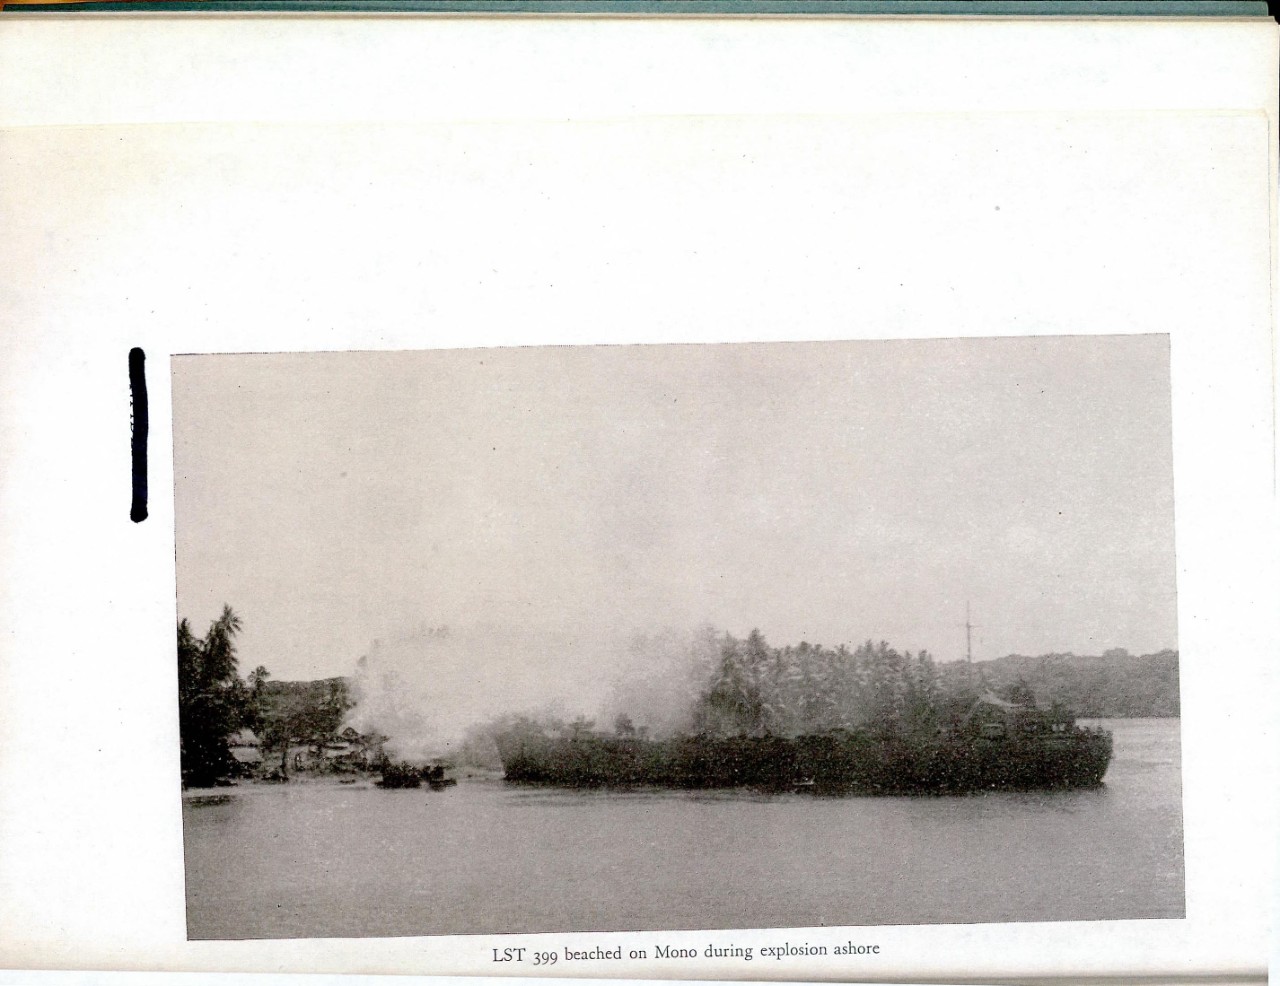 LST 399 beached on Mono during explosion ashore